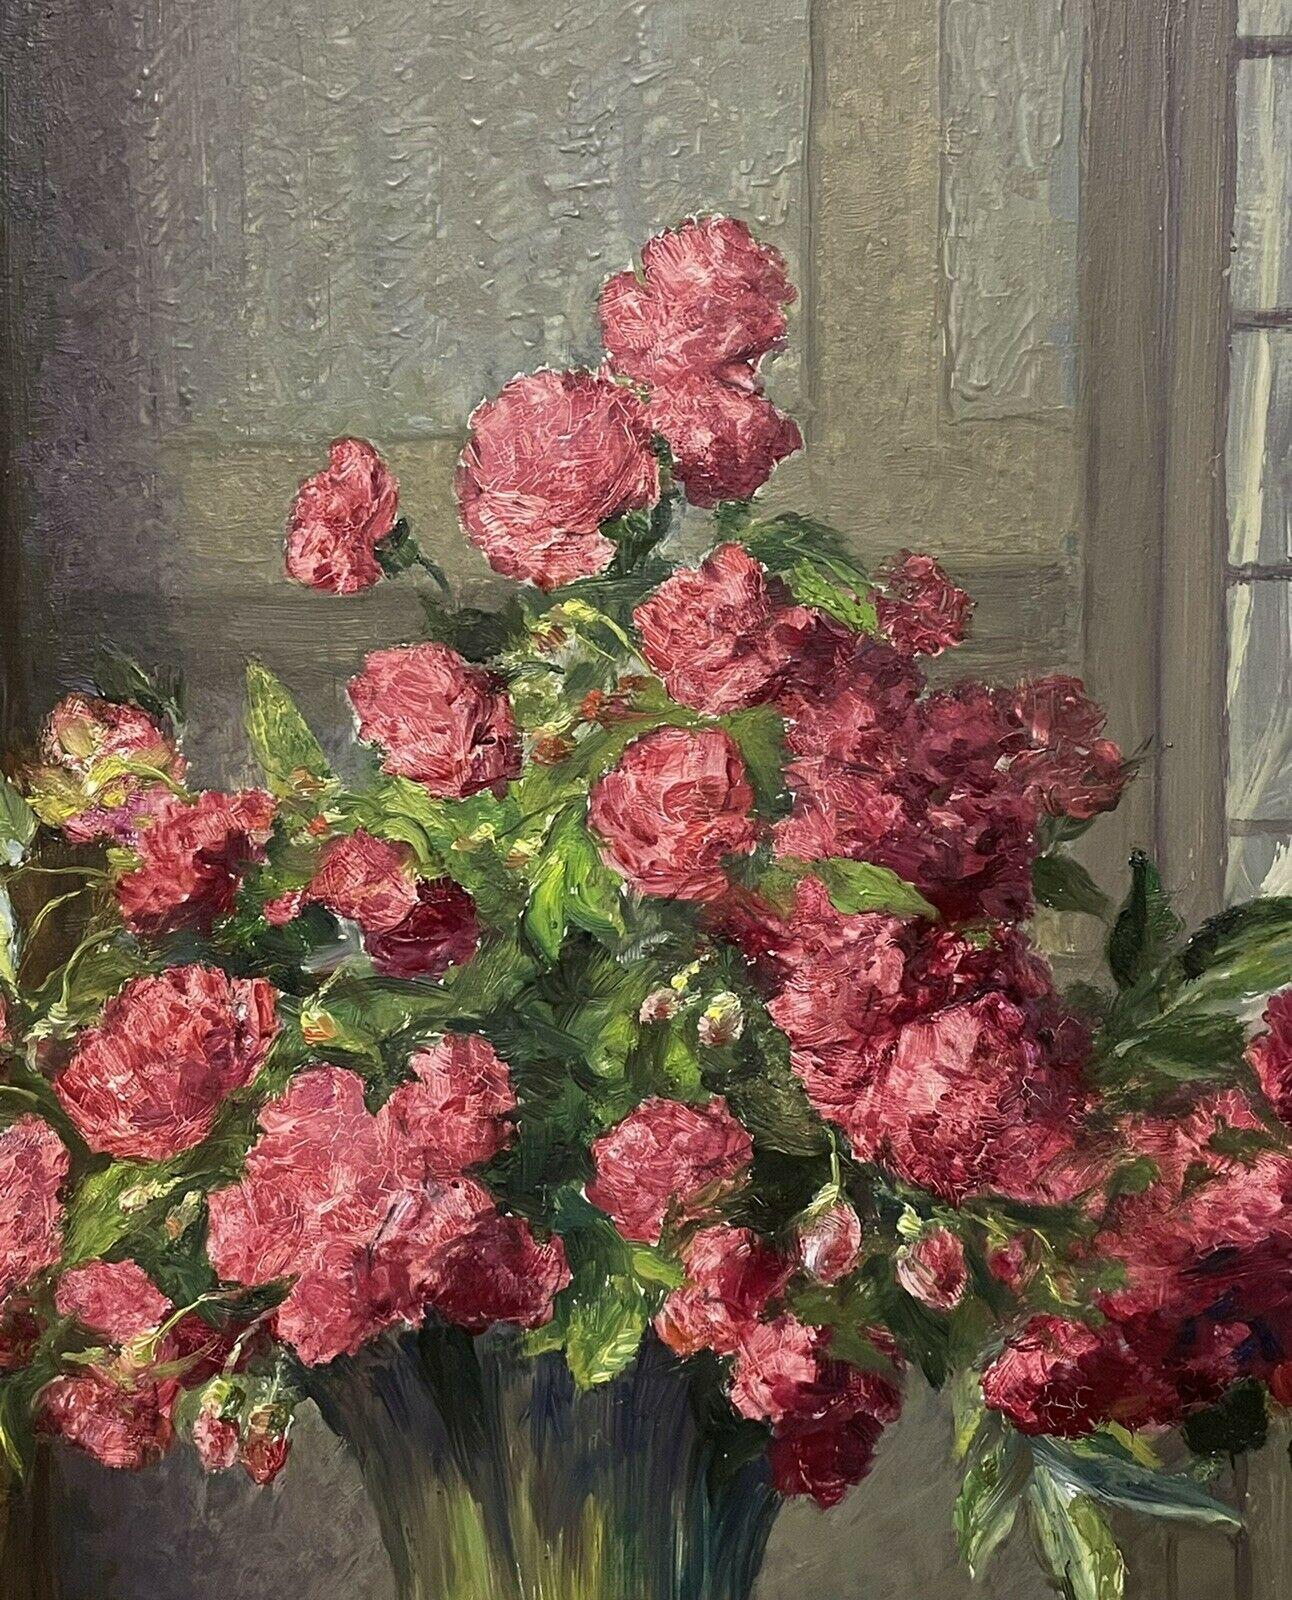 Vintage French Signed Oil Crimson Roses in Interior Still Life Room - Impressionist Painting by Unknown